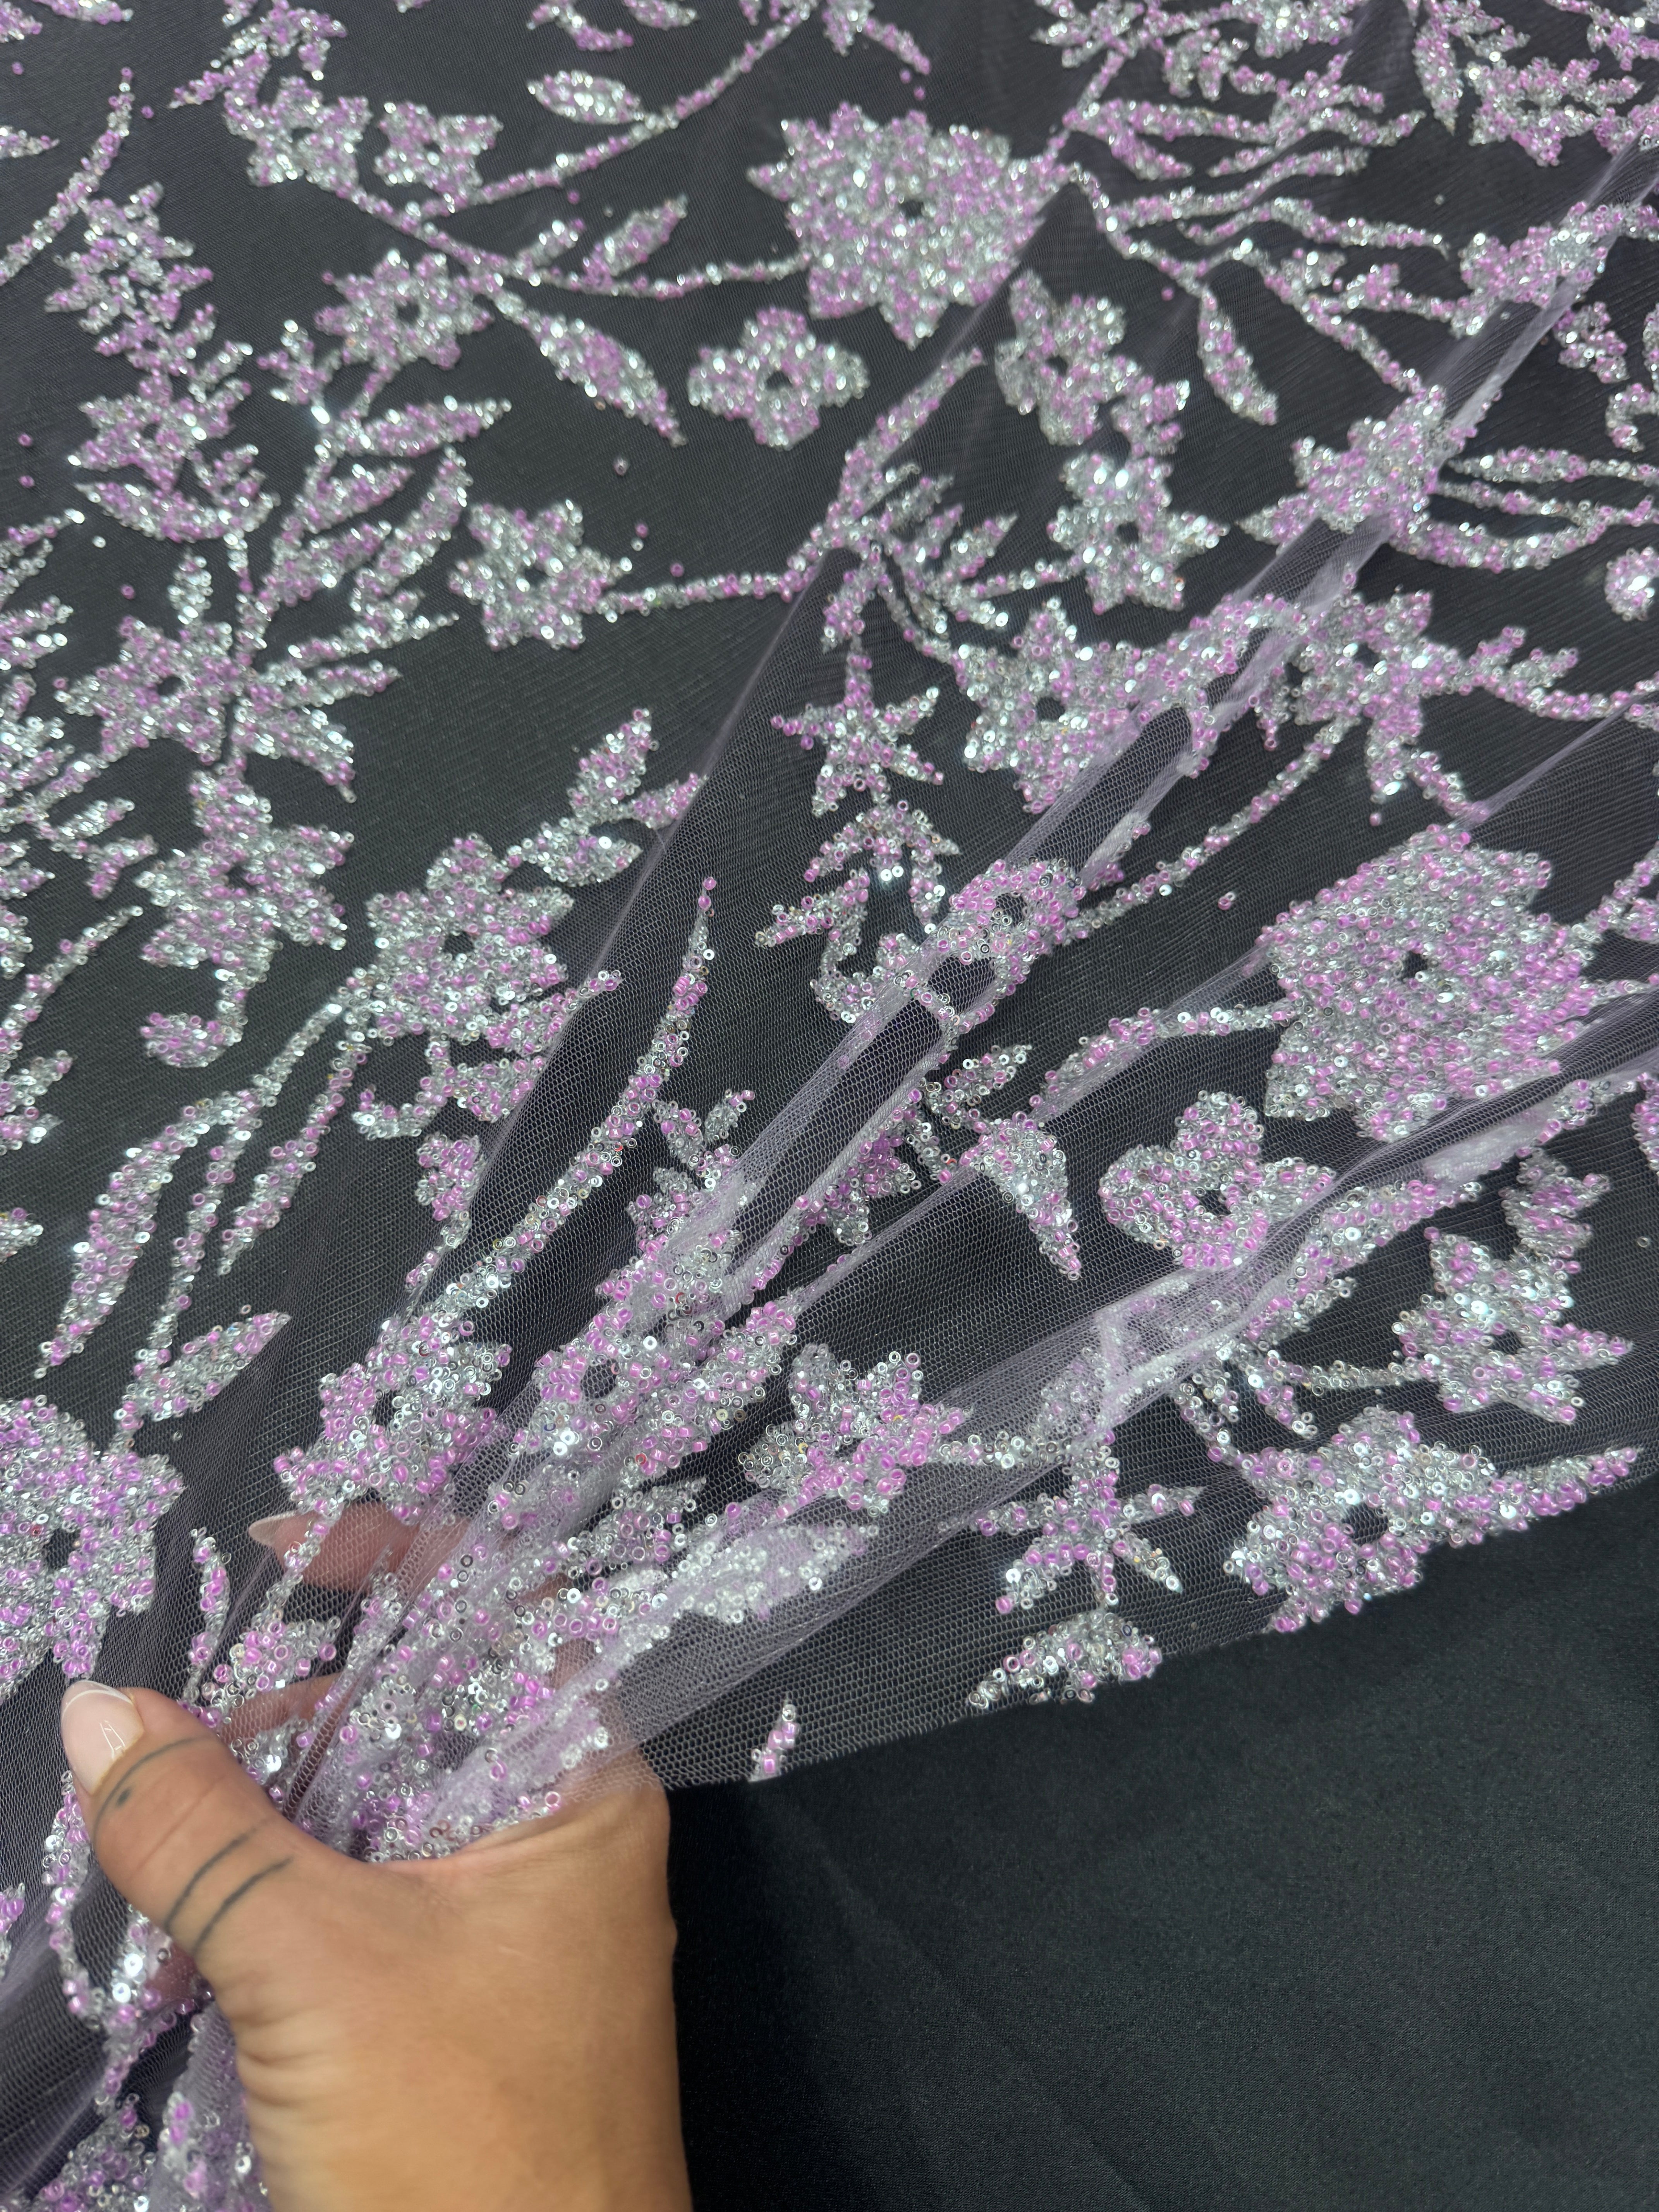 Lavender Silver Floral Beaded Lace, online textile store, sewing, fabric store, sewing store, cheap fabric store, kiki textiles